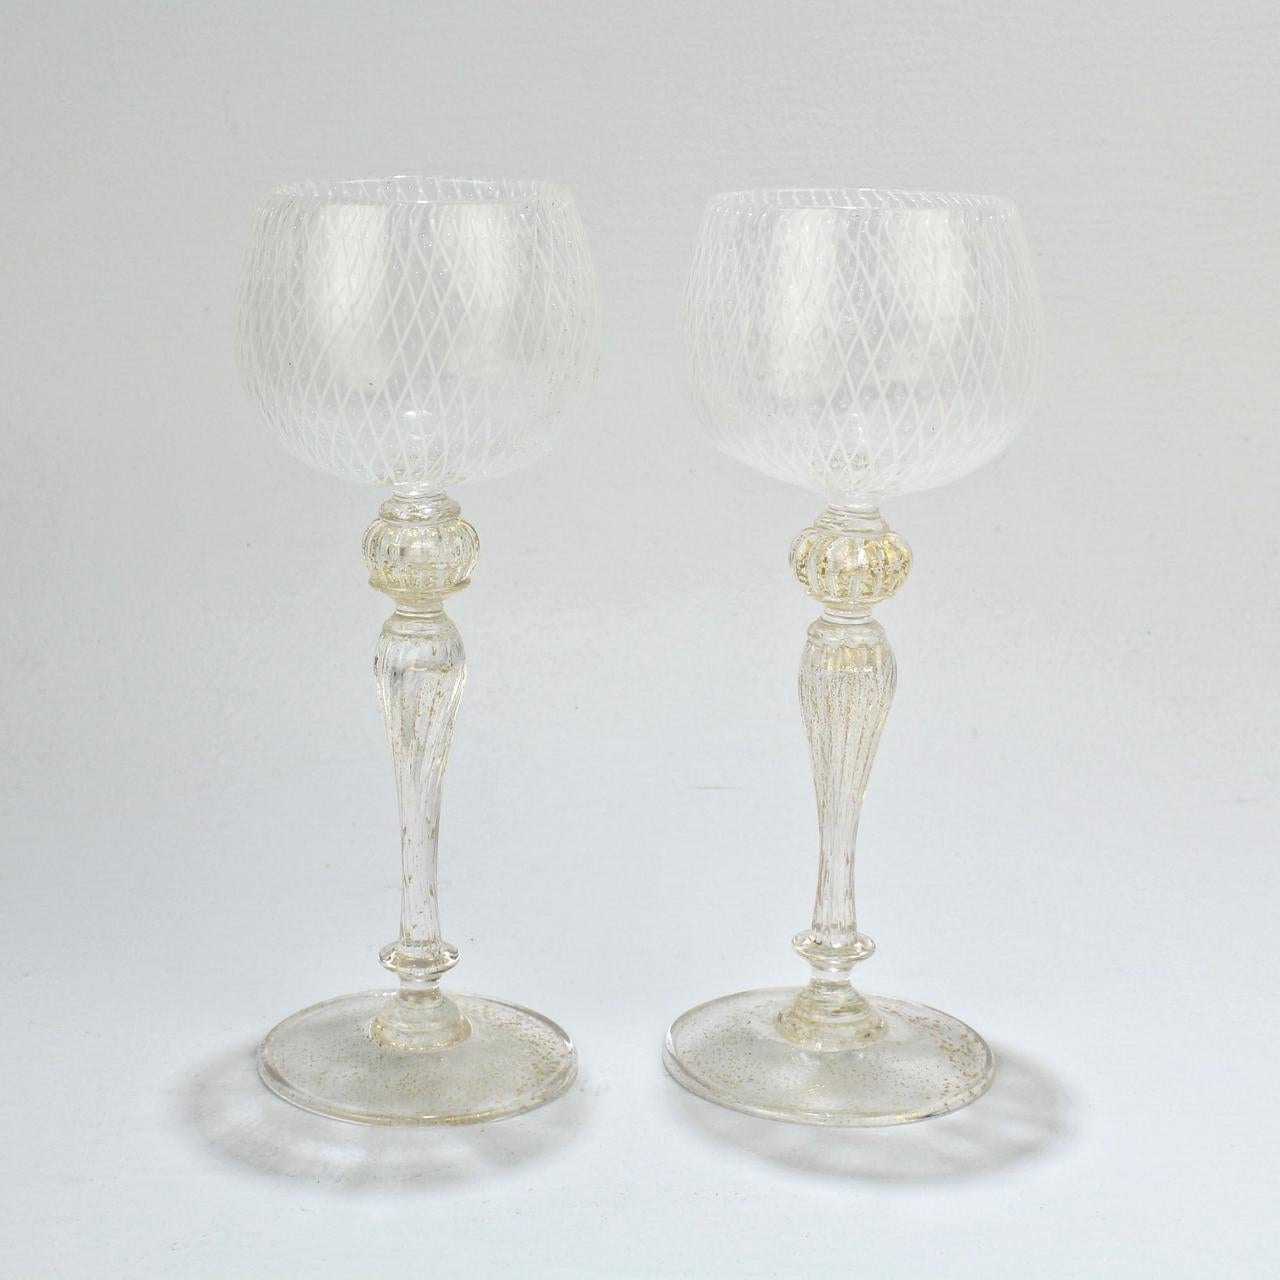 An elegant set of 10 Venetian glass wine glasses.

Attributed to Seguso.

The bowl of each goblet is finely decorated in the reticulo filigrana technique (which consists of individual white glass rods in a diamond mesh pattern that is punctuated